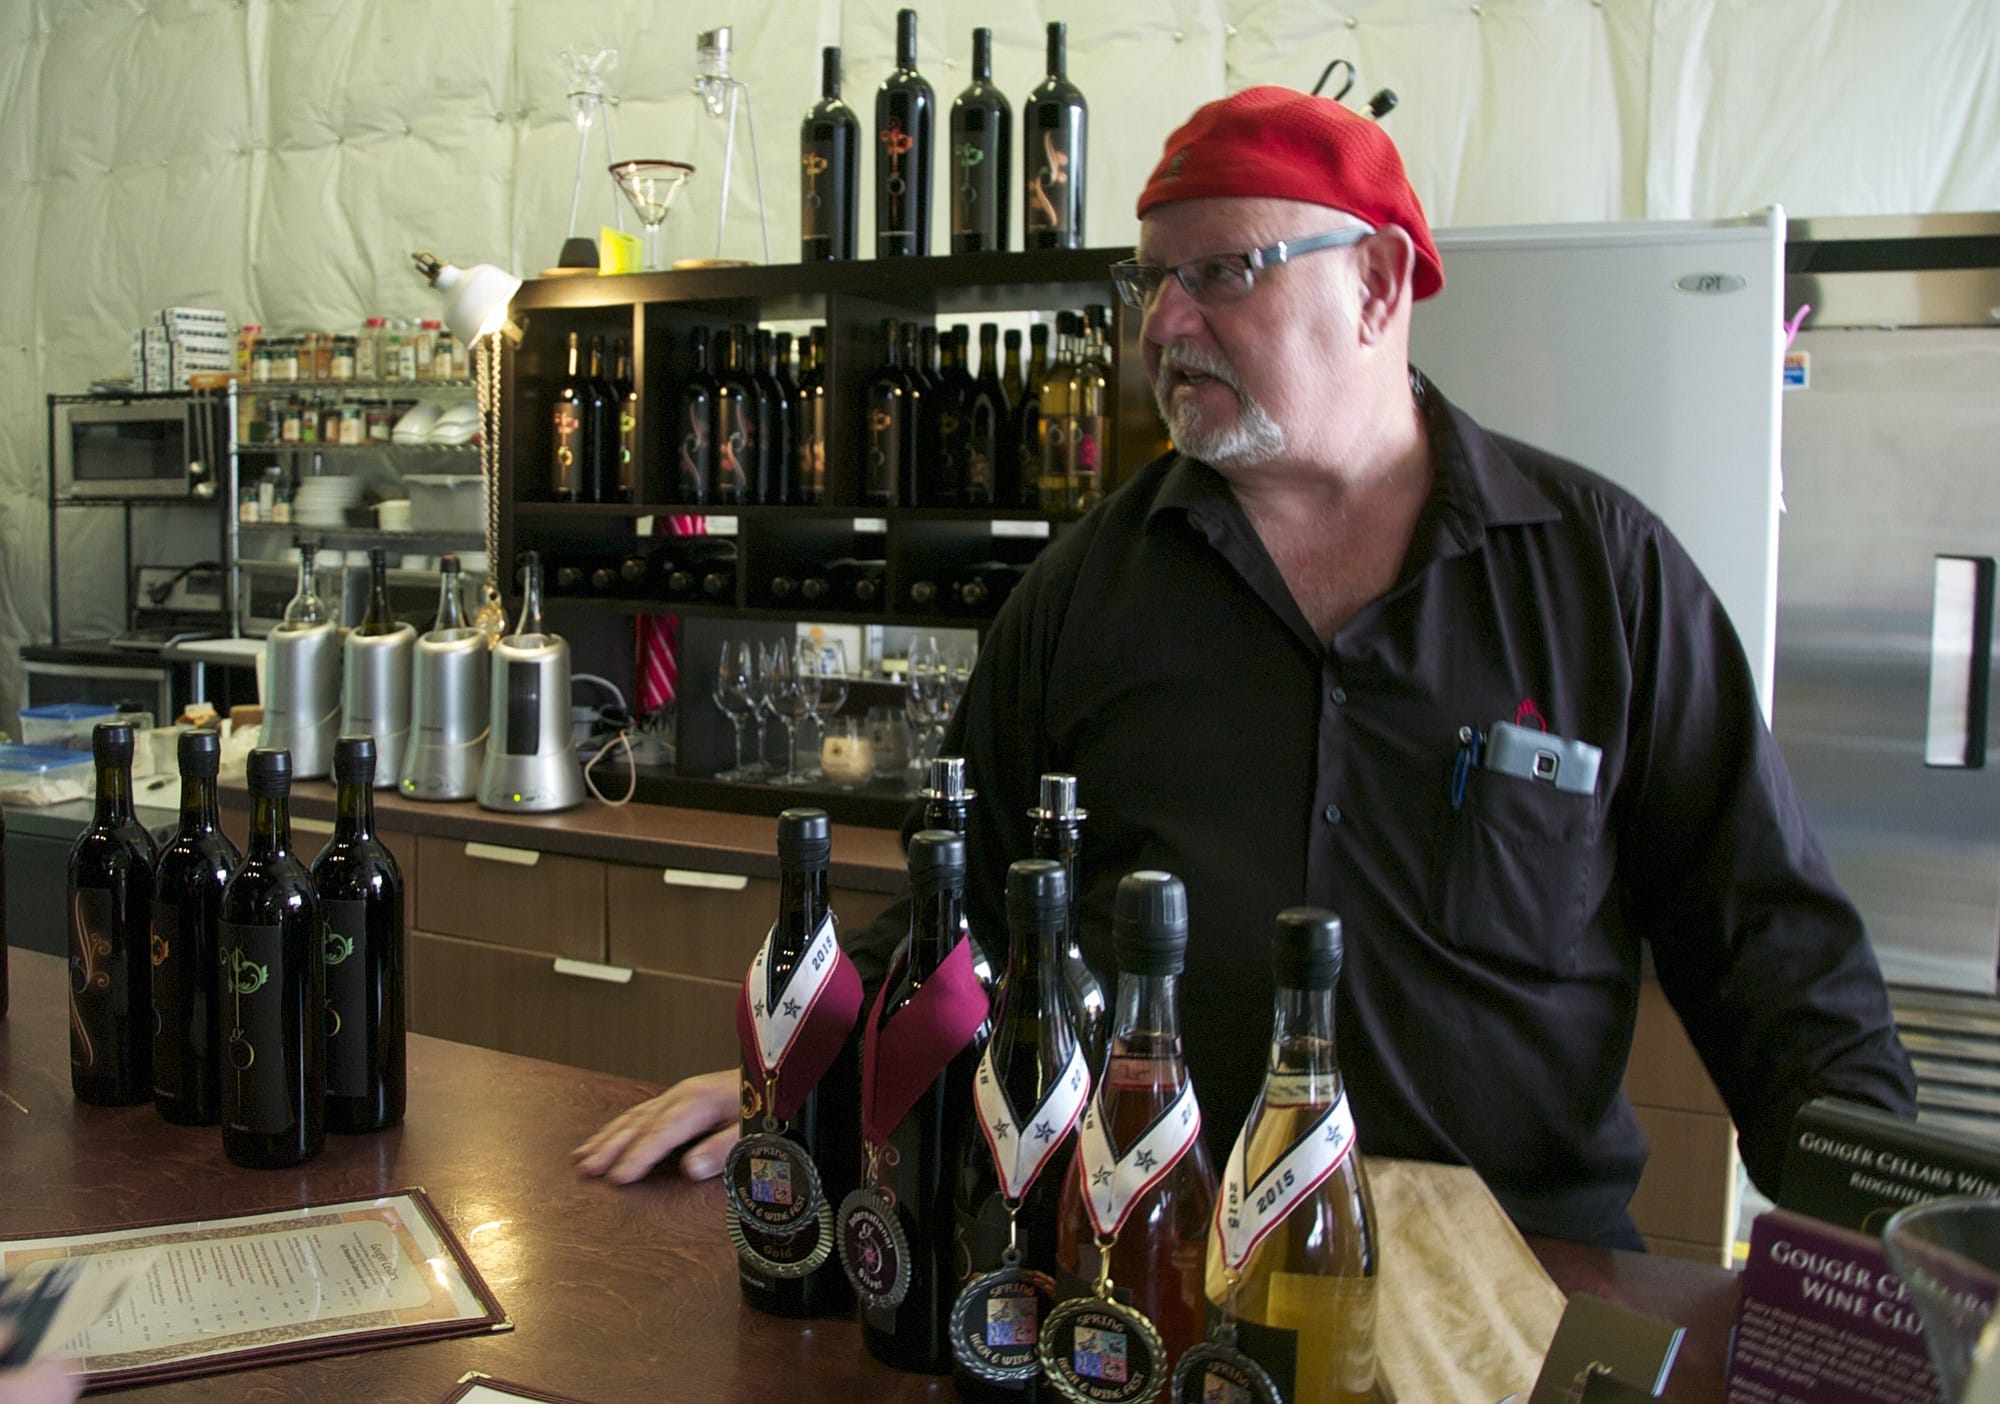 Business is going strong for Gary Gouger, the owner of Gouger Cellars in Ridgefield. This spring, Gouger is planning a remodel to make more room for customers.